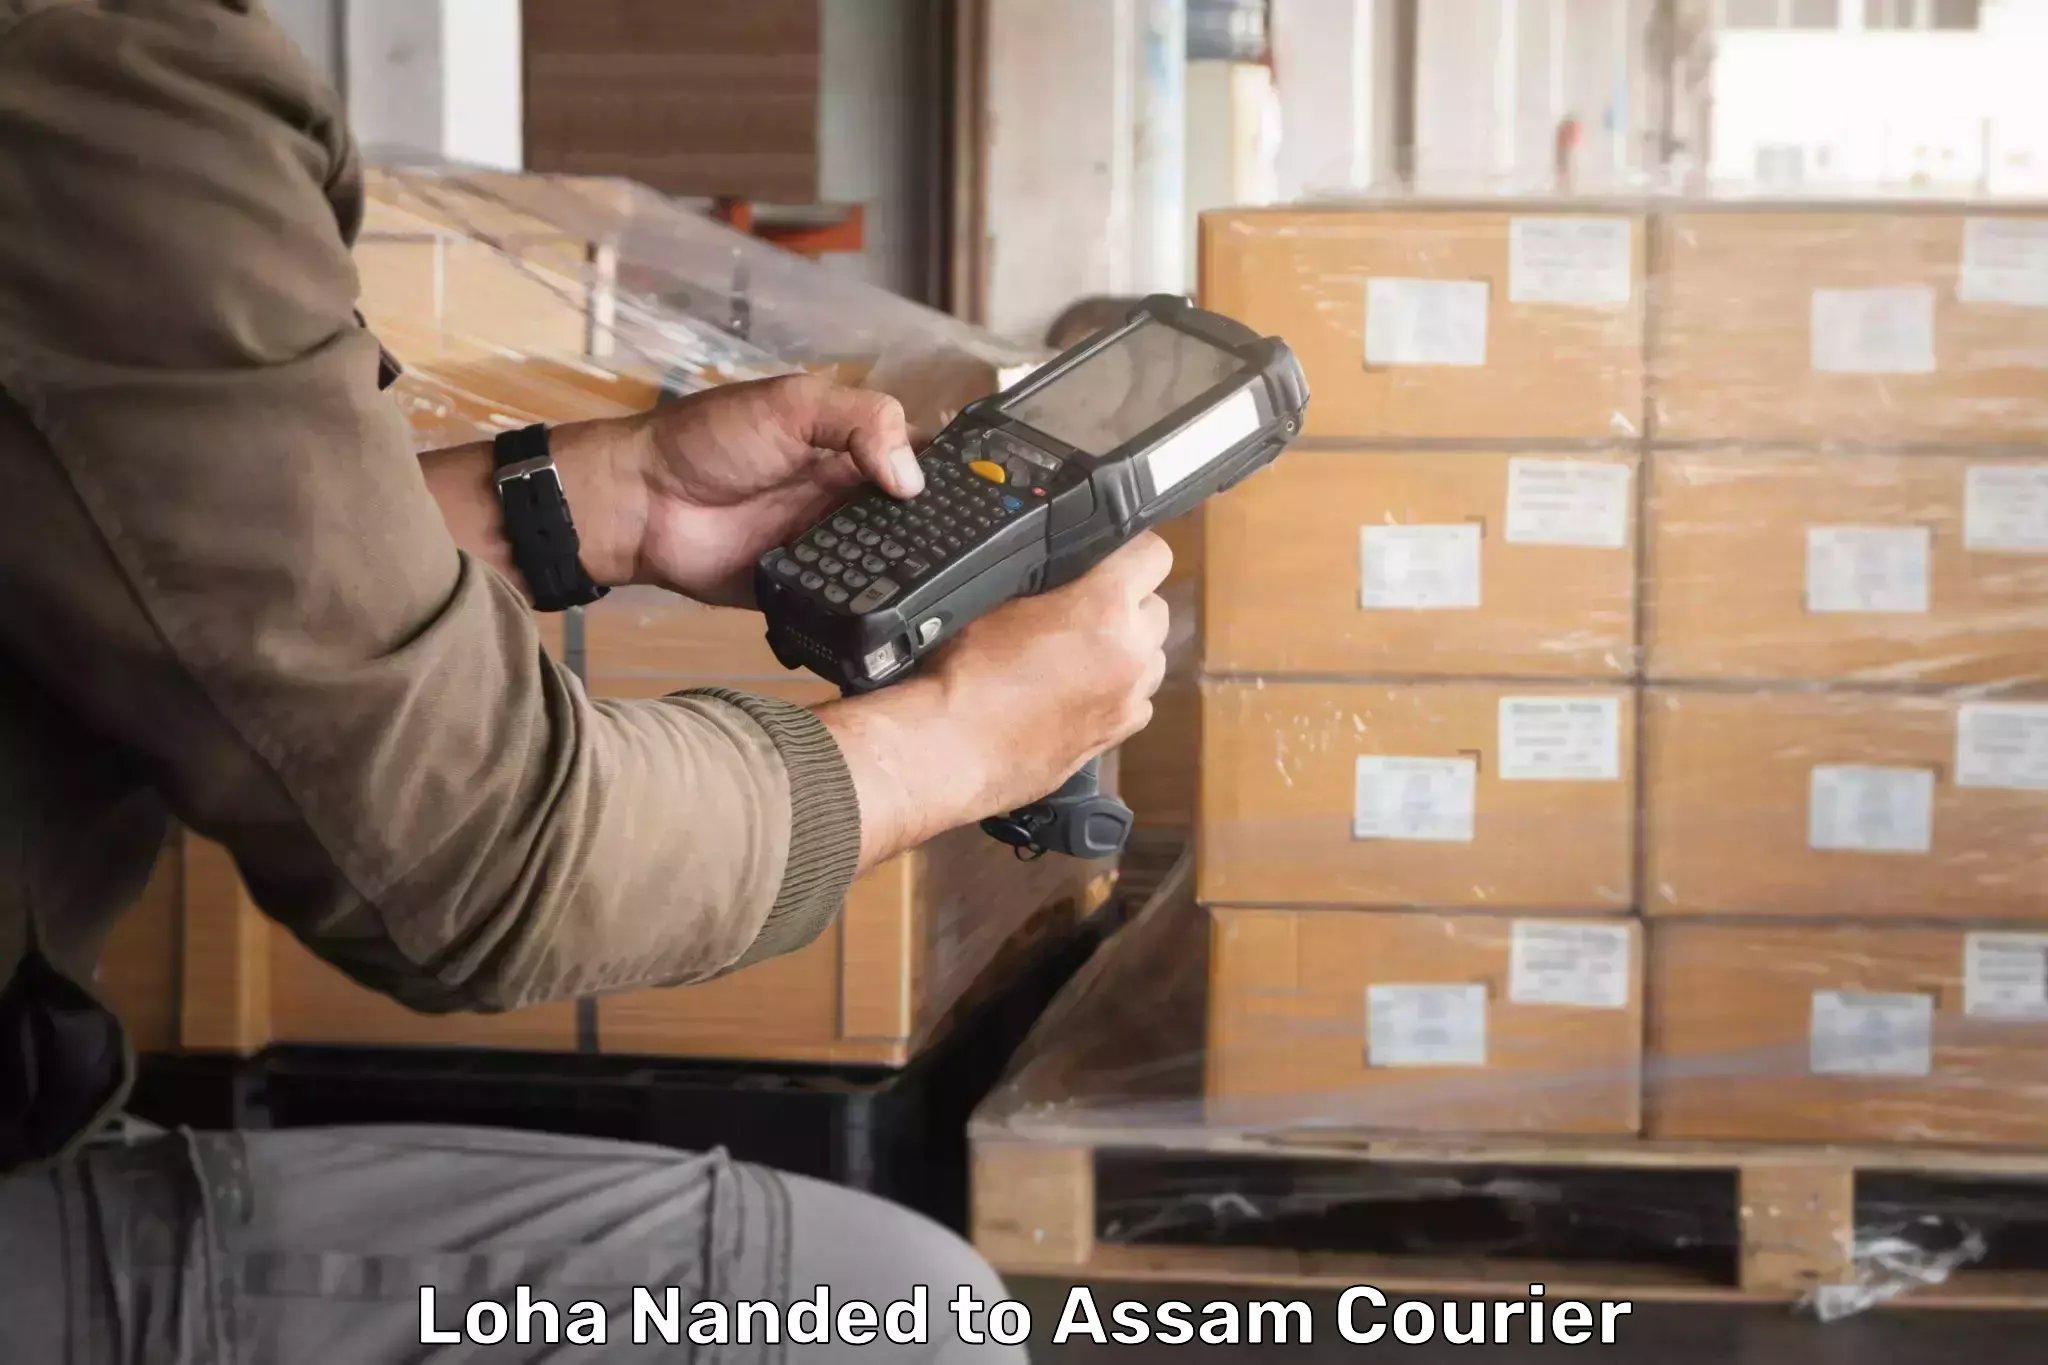 Courier insurance Loha Nanded to Assam